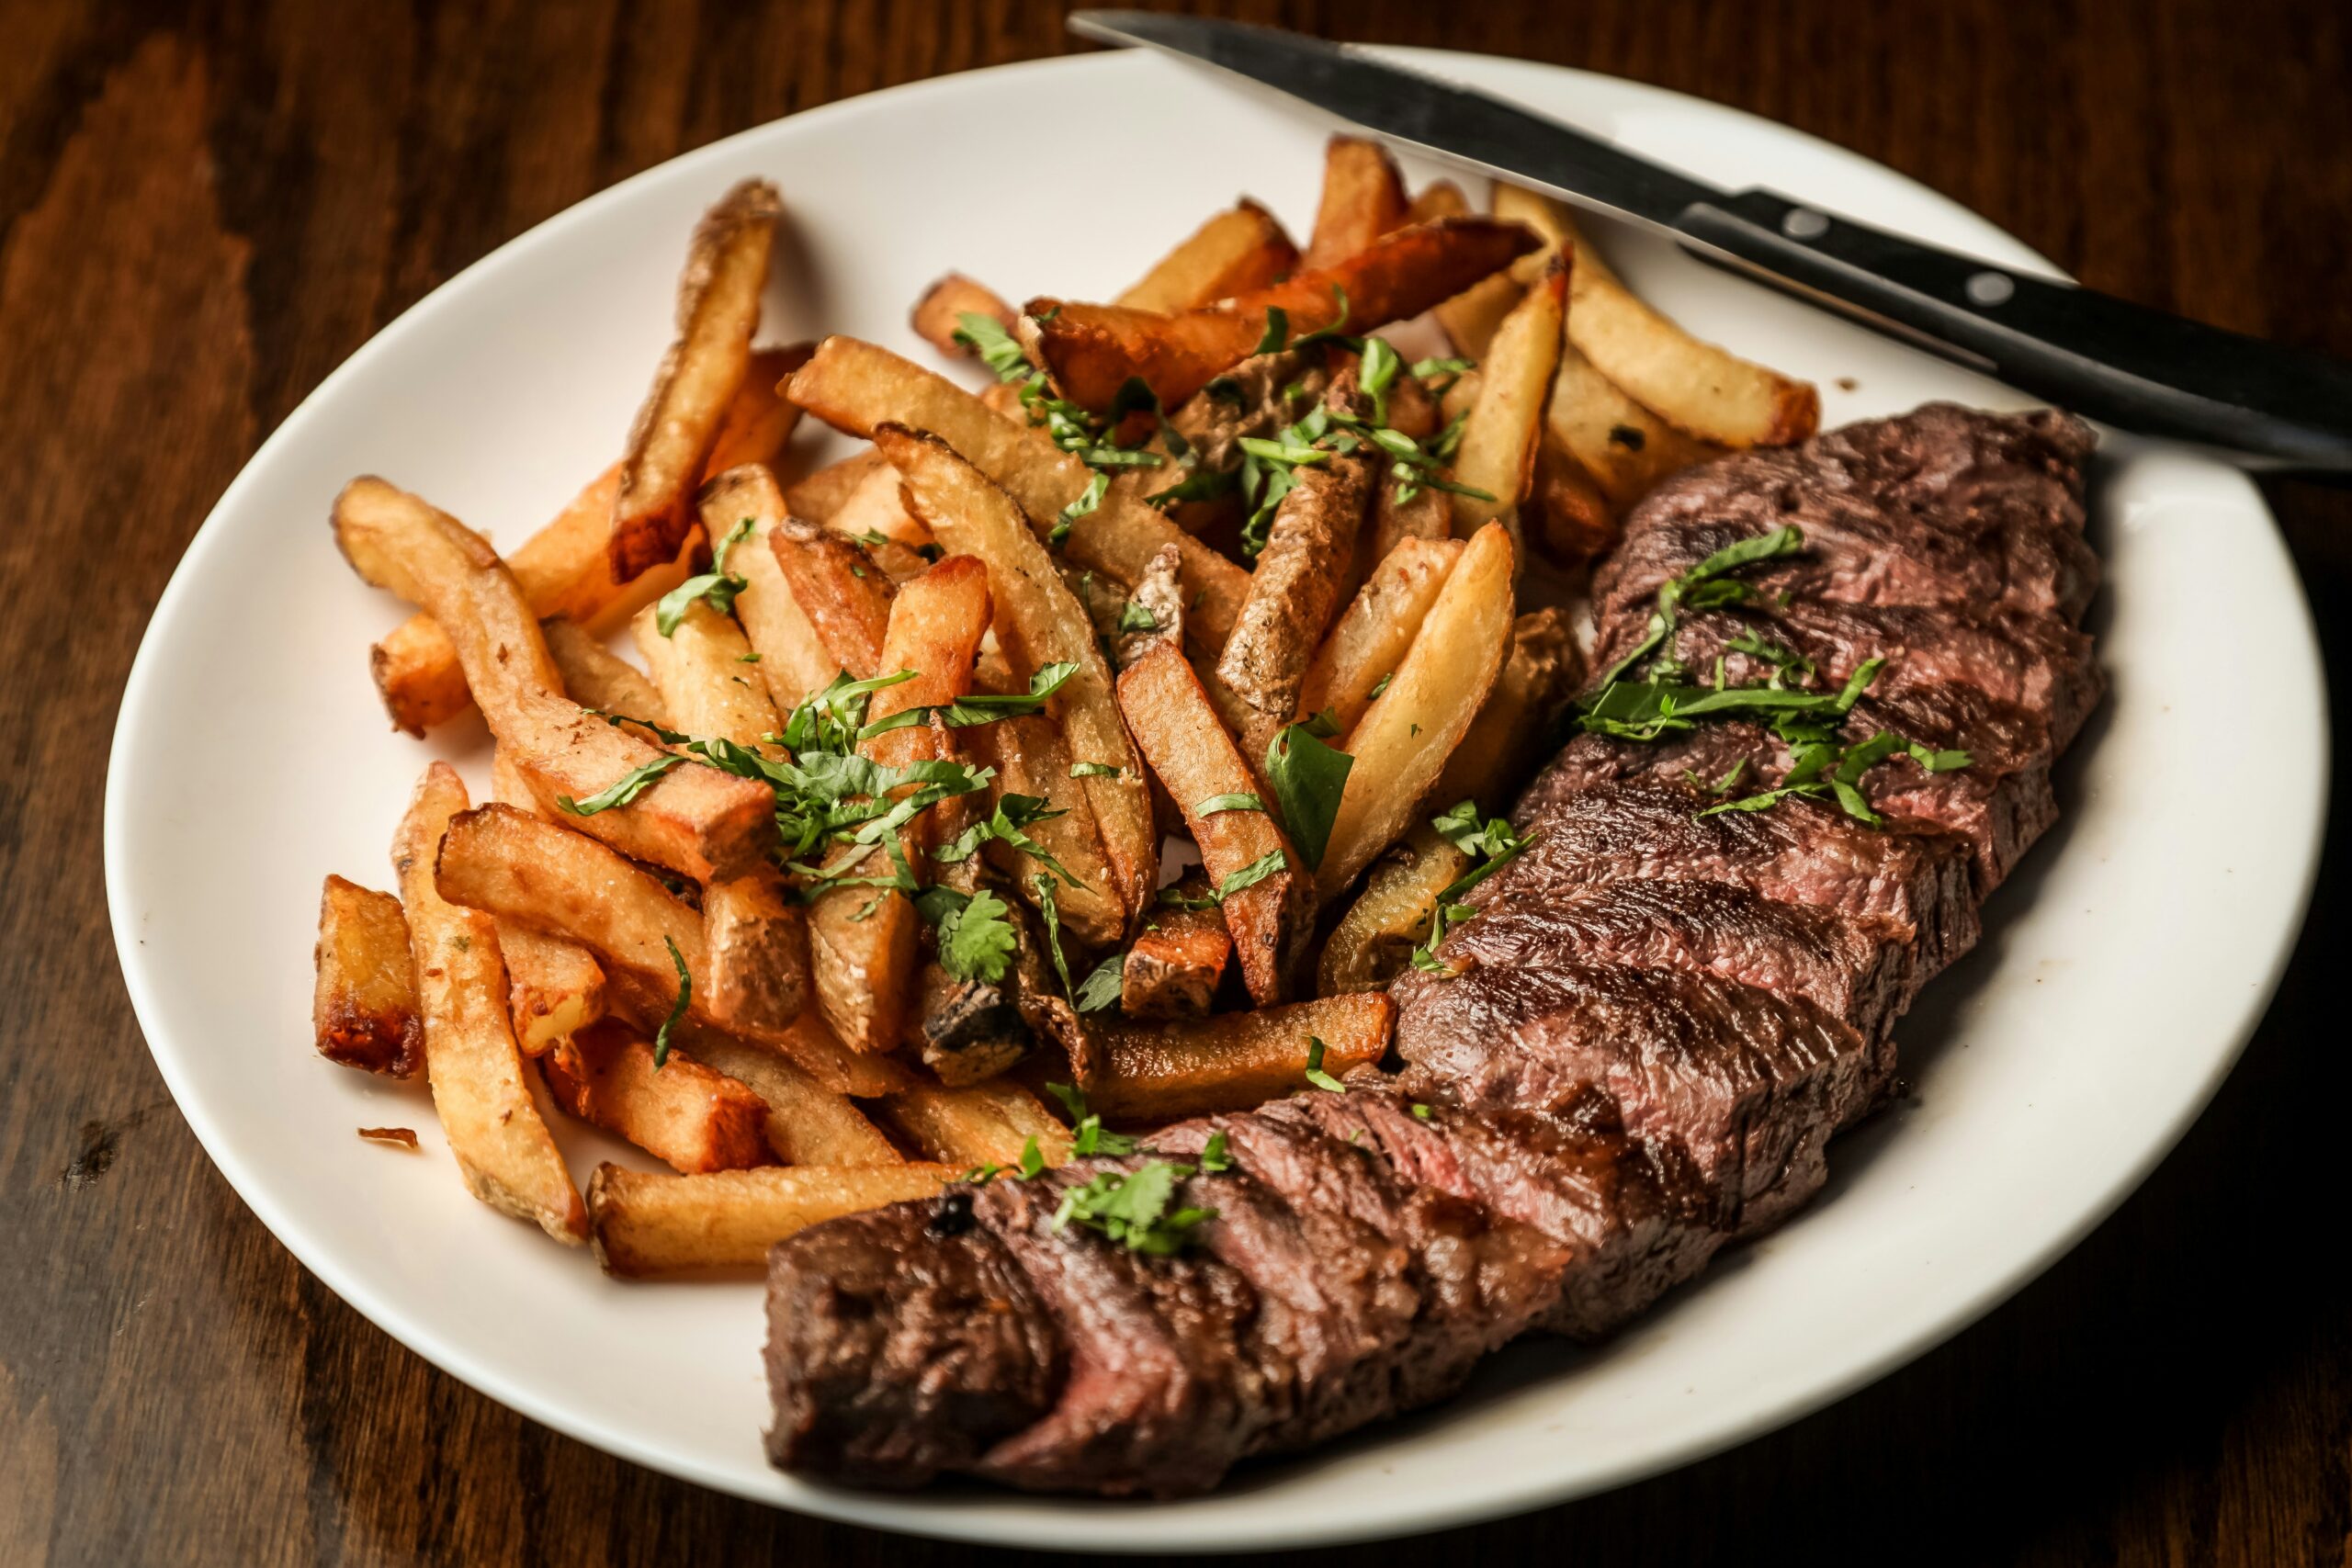 Ribeye steak is a classic Valentine's Day dinner idea. Pictured: Ribeye steak and fries